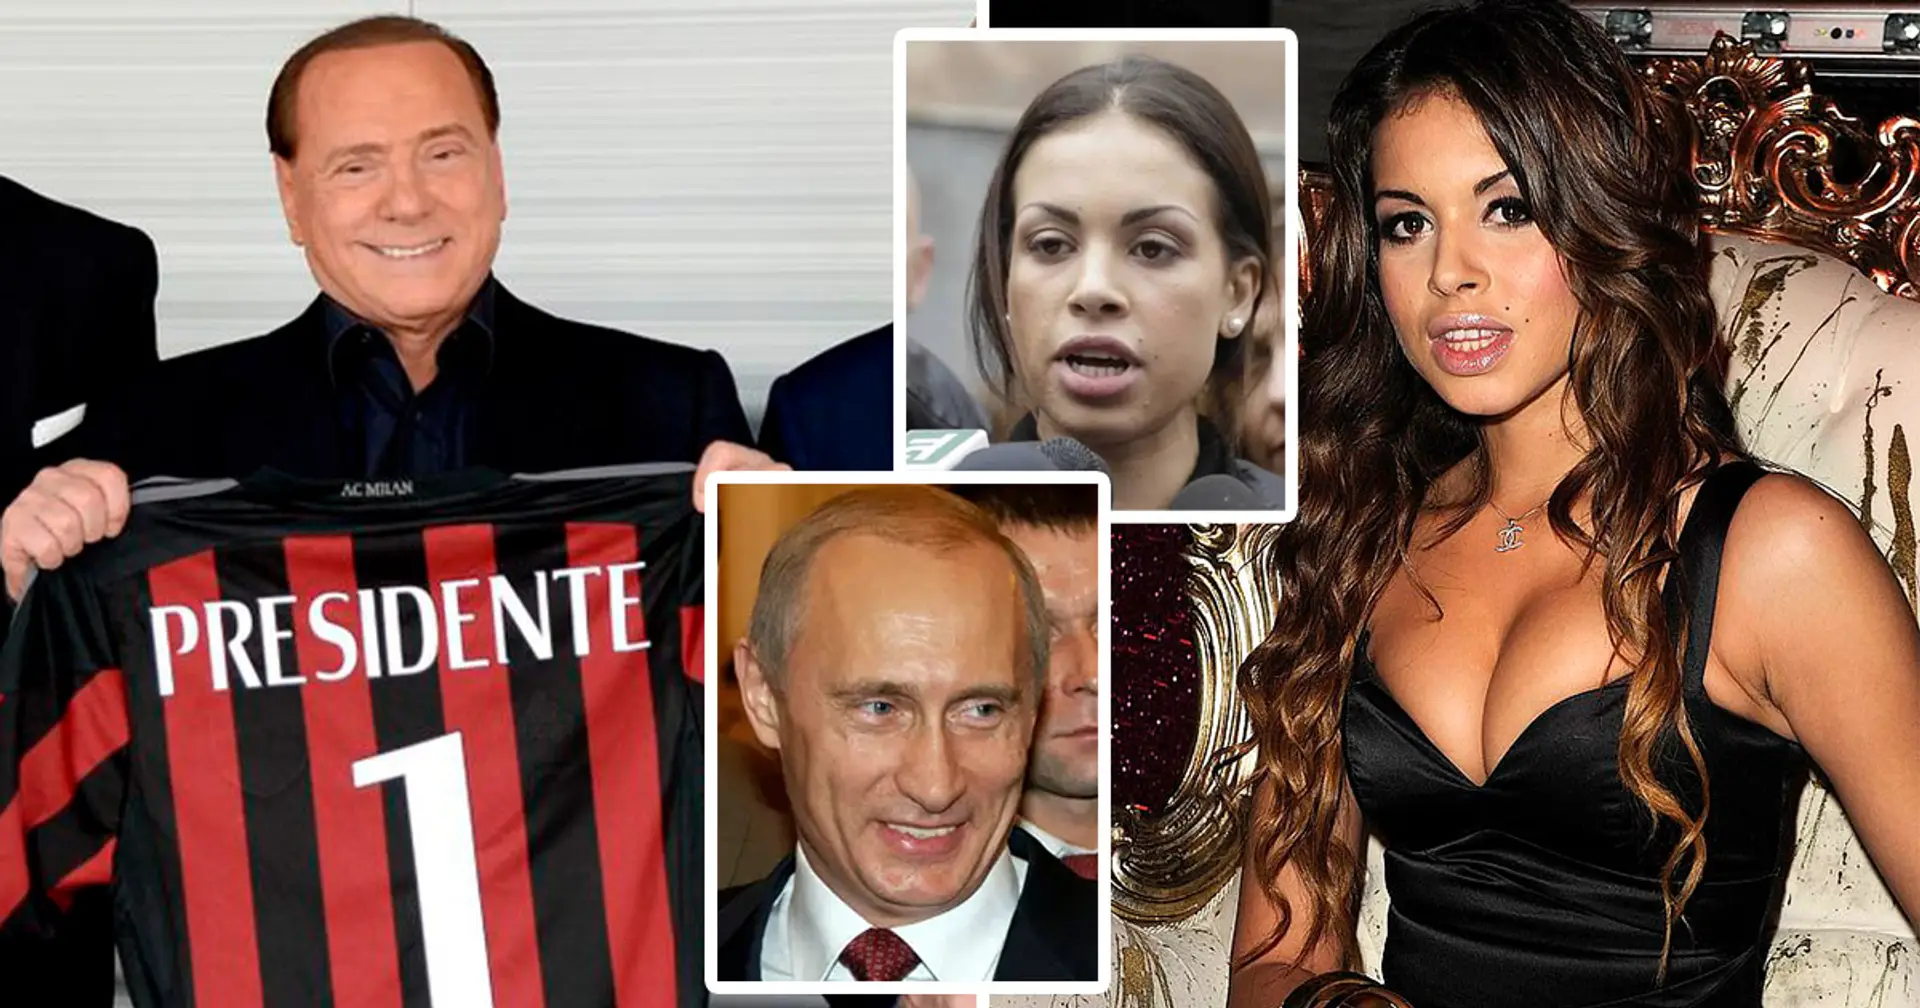 'Berlusconi's home was a bordello': Former AC Milan president used women as slaves when he threw his infamous wild parties